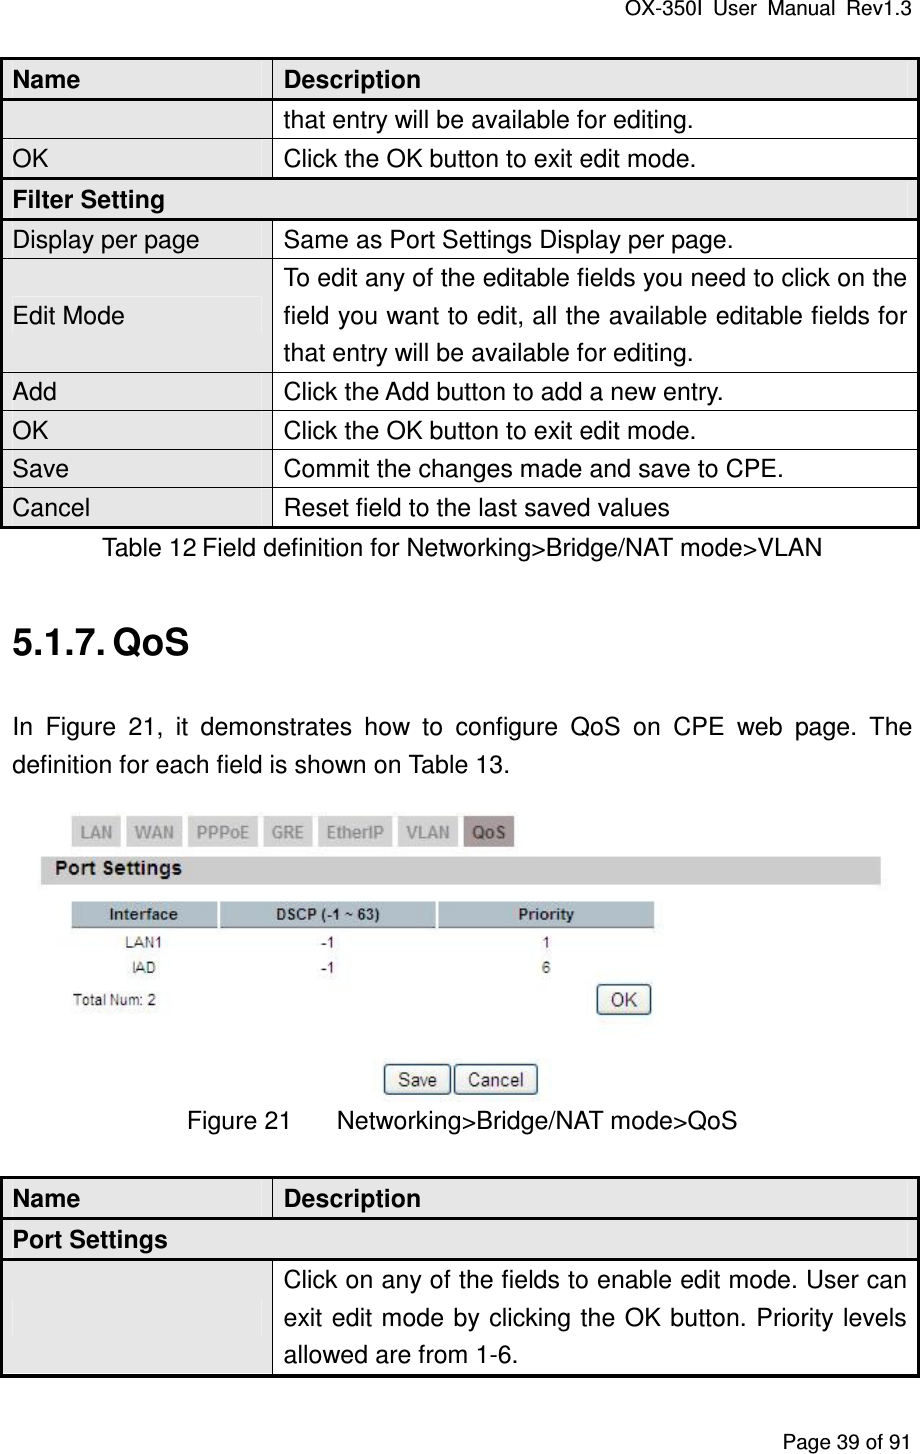 OX-350I  User  Manual  Rev1.3 Page 39 of 91 Name  Description that entry will be available for editing. OK  Click the OK button to exit edit mode. Filter Setting Display per page  Same as Port Settings Display per page. Edit Mode To edit any of the editable fields you need to click on the field you want to edit, all the available editable fields for that entry will be available for editing. Add  Click the Add button to add a new entry. OK  Click the OK button to exit edit mode. Save  Commit the changes made and save to CPE. Cancel  Reset field to the last saved values Table 12 Field definition for Networking&gt;Bridge/NAT mode&gt;VLAN 5.1.7. QoS In  Figure  21,  it  demonstrates  how  to  configure  QoS  on  CPE  web  page.  The definition for each field is shown on Table 13.  Figure 21  Networking&gt;Bridge/NAT mode&gt;QoS Name  Description Port Settings  Click on any of the fields to enable edit mode. User can exit edit mode by clicking the OK button. Priority levels allowed are from 1-6. 